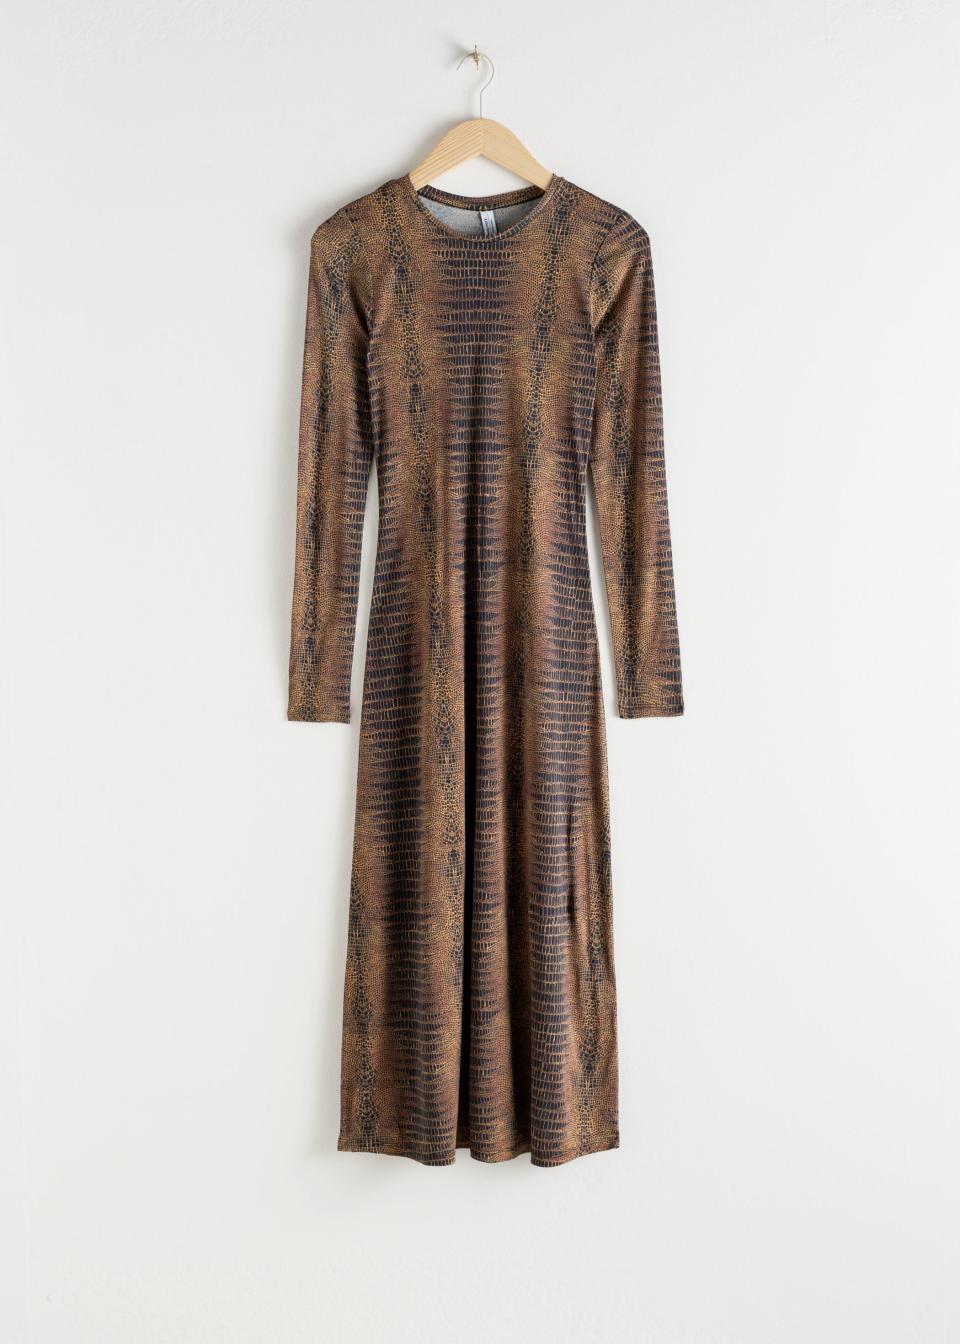 & Other Stories Croc-Print Fitted Midi Dress